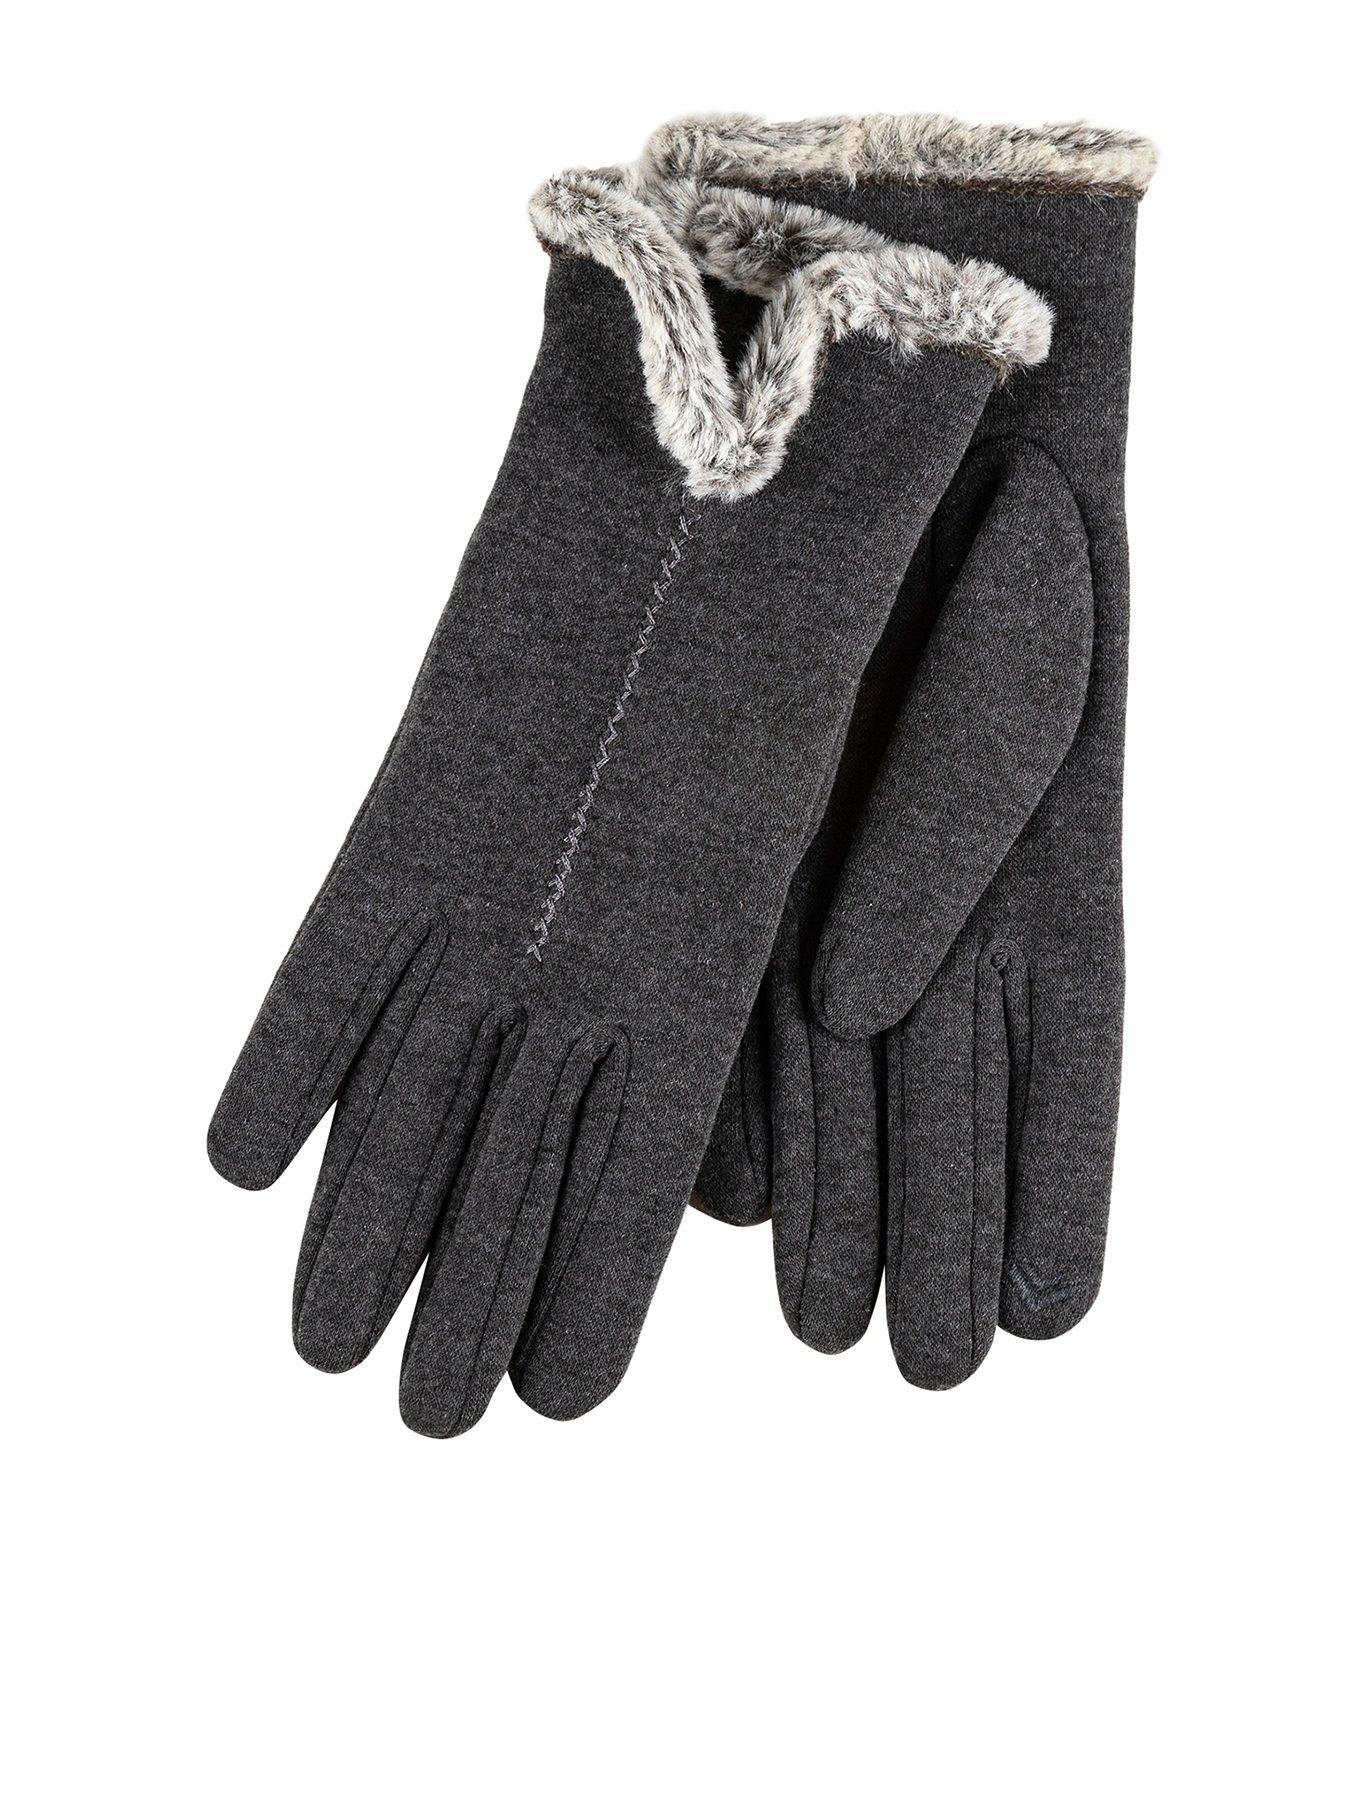 $189 ISOTONER MEN BLACK KNIT LEATHER SMART TOUCH THERMAL WINTER GLOVES SIZE M 